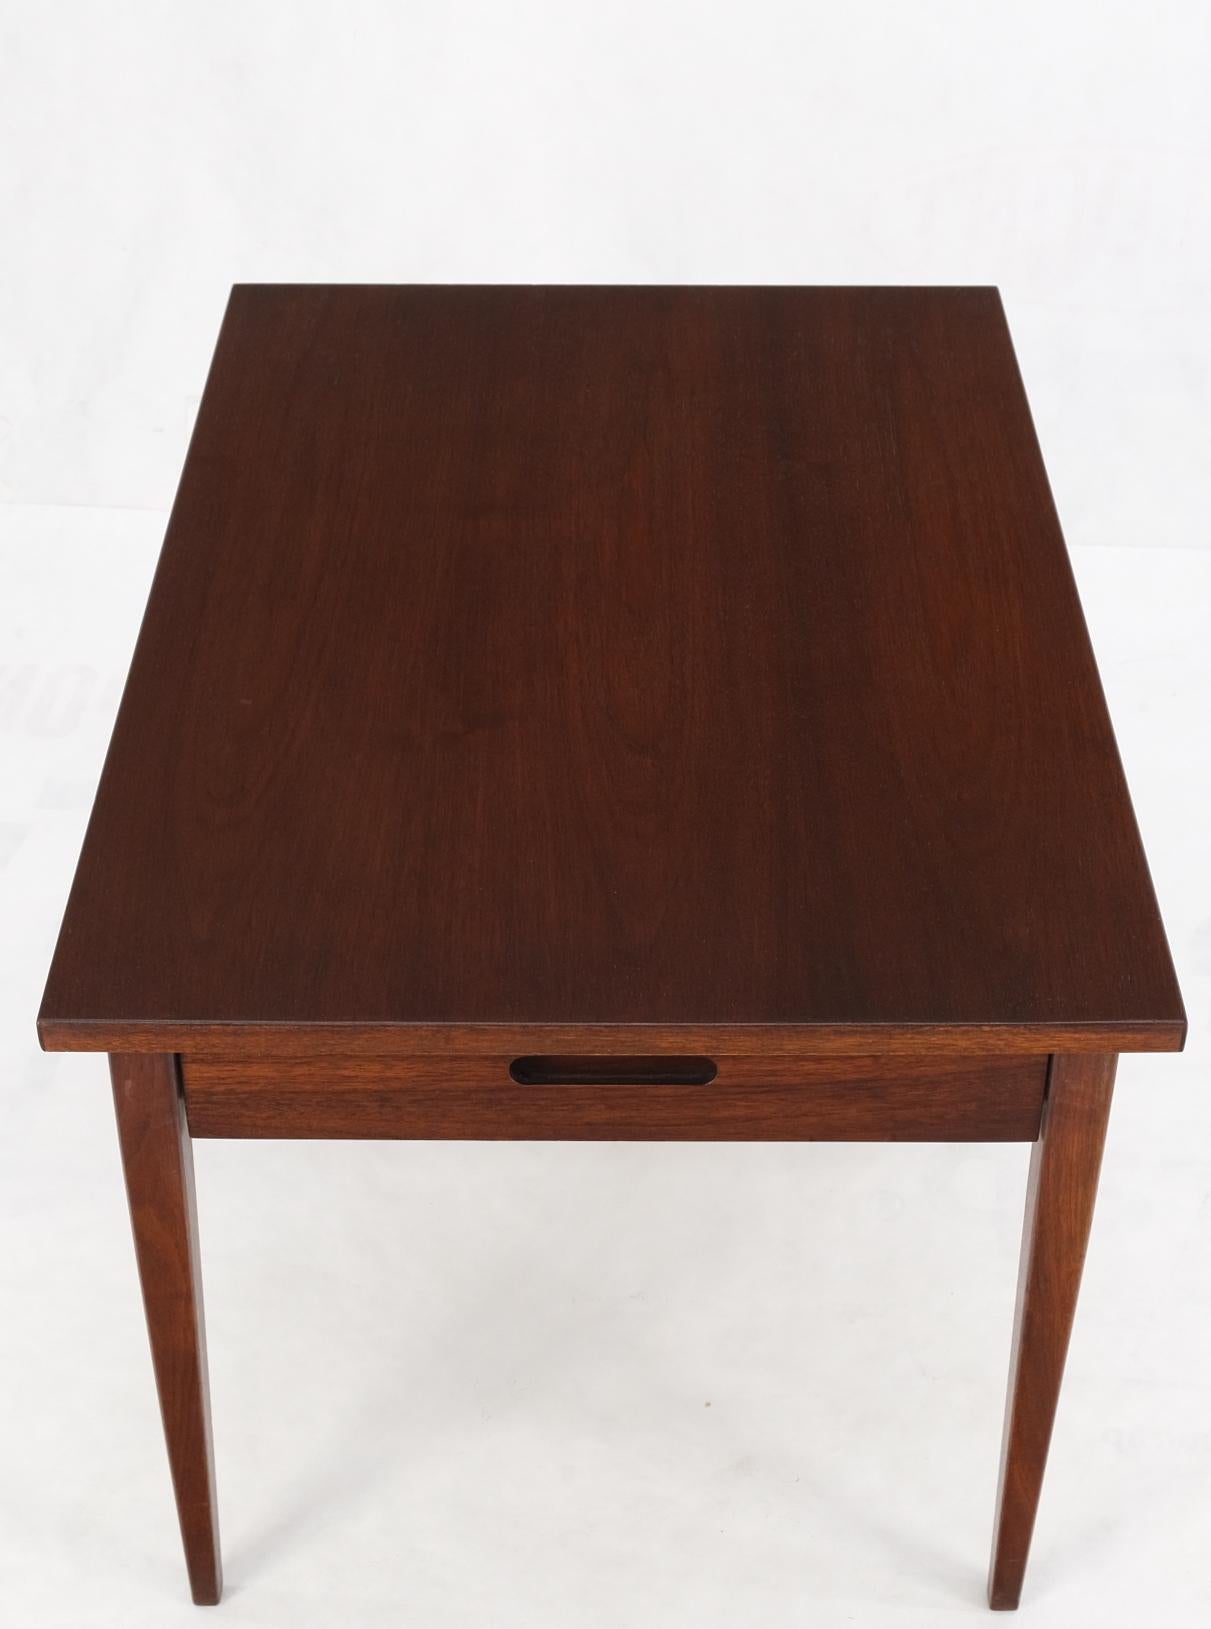 Knoll Risom One Drawer Oiled Walnut Tapered Legs End Side Table Stand Decor Mint For Sale 8